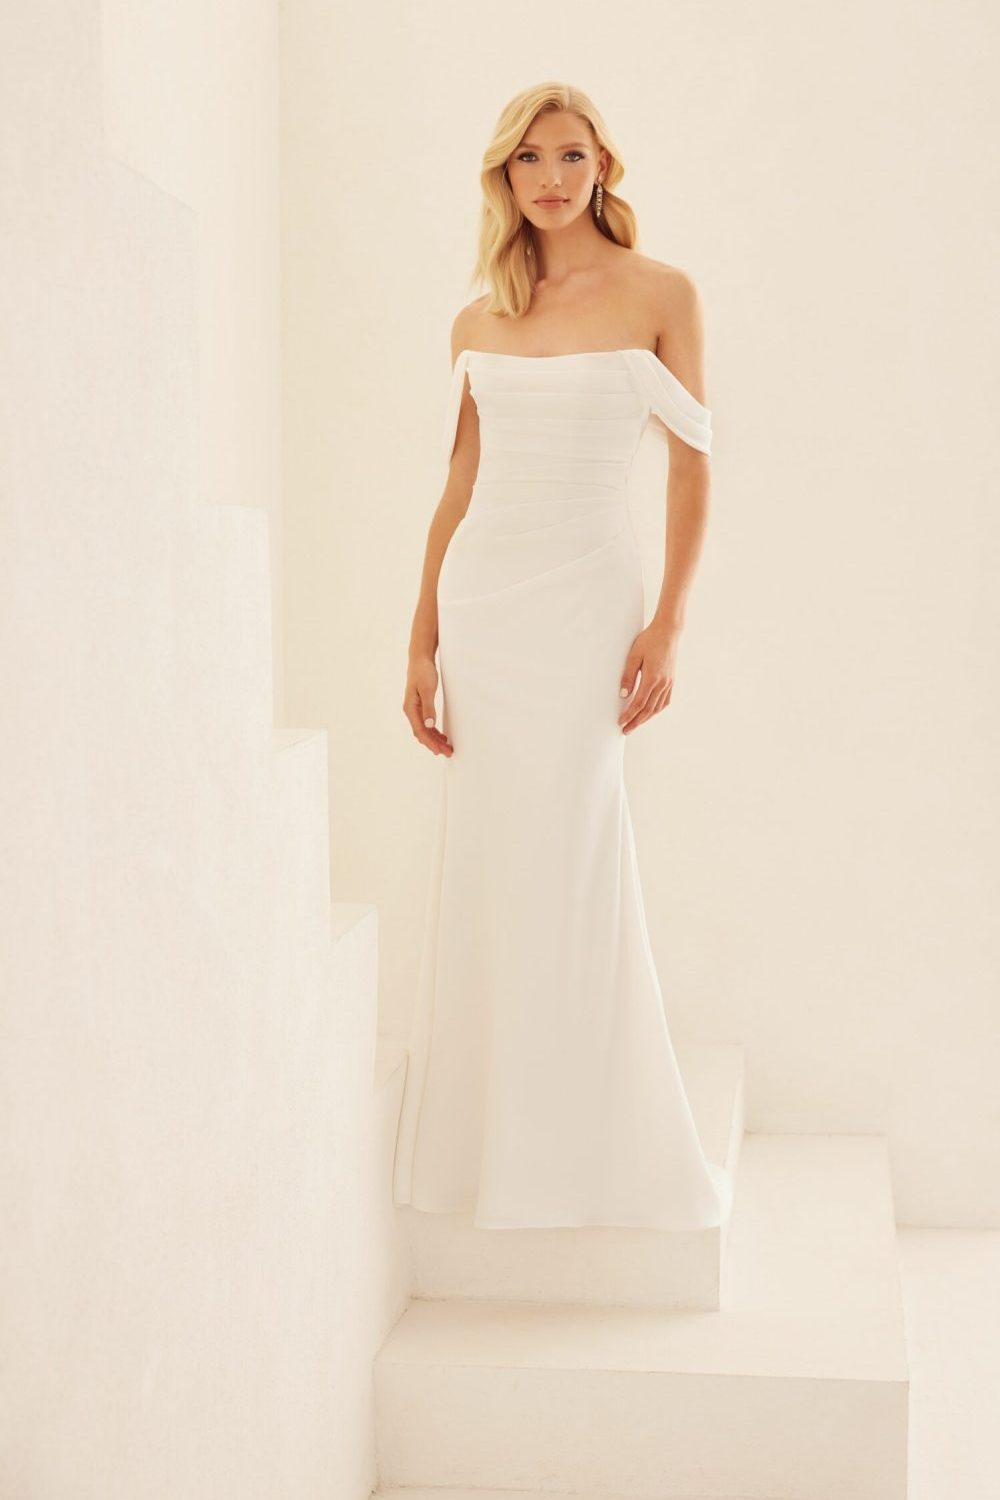 Unforgettable: Timeless Wedding Dresses For Classic Brides